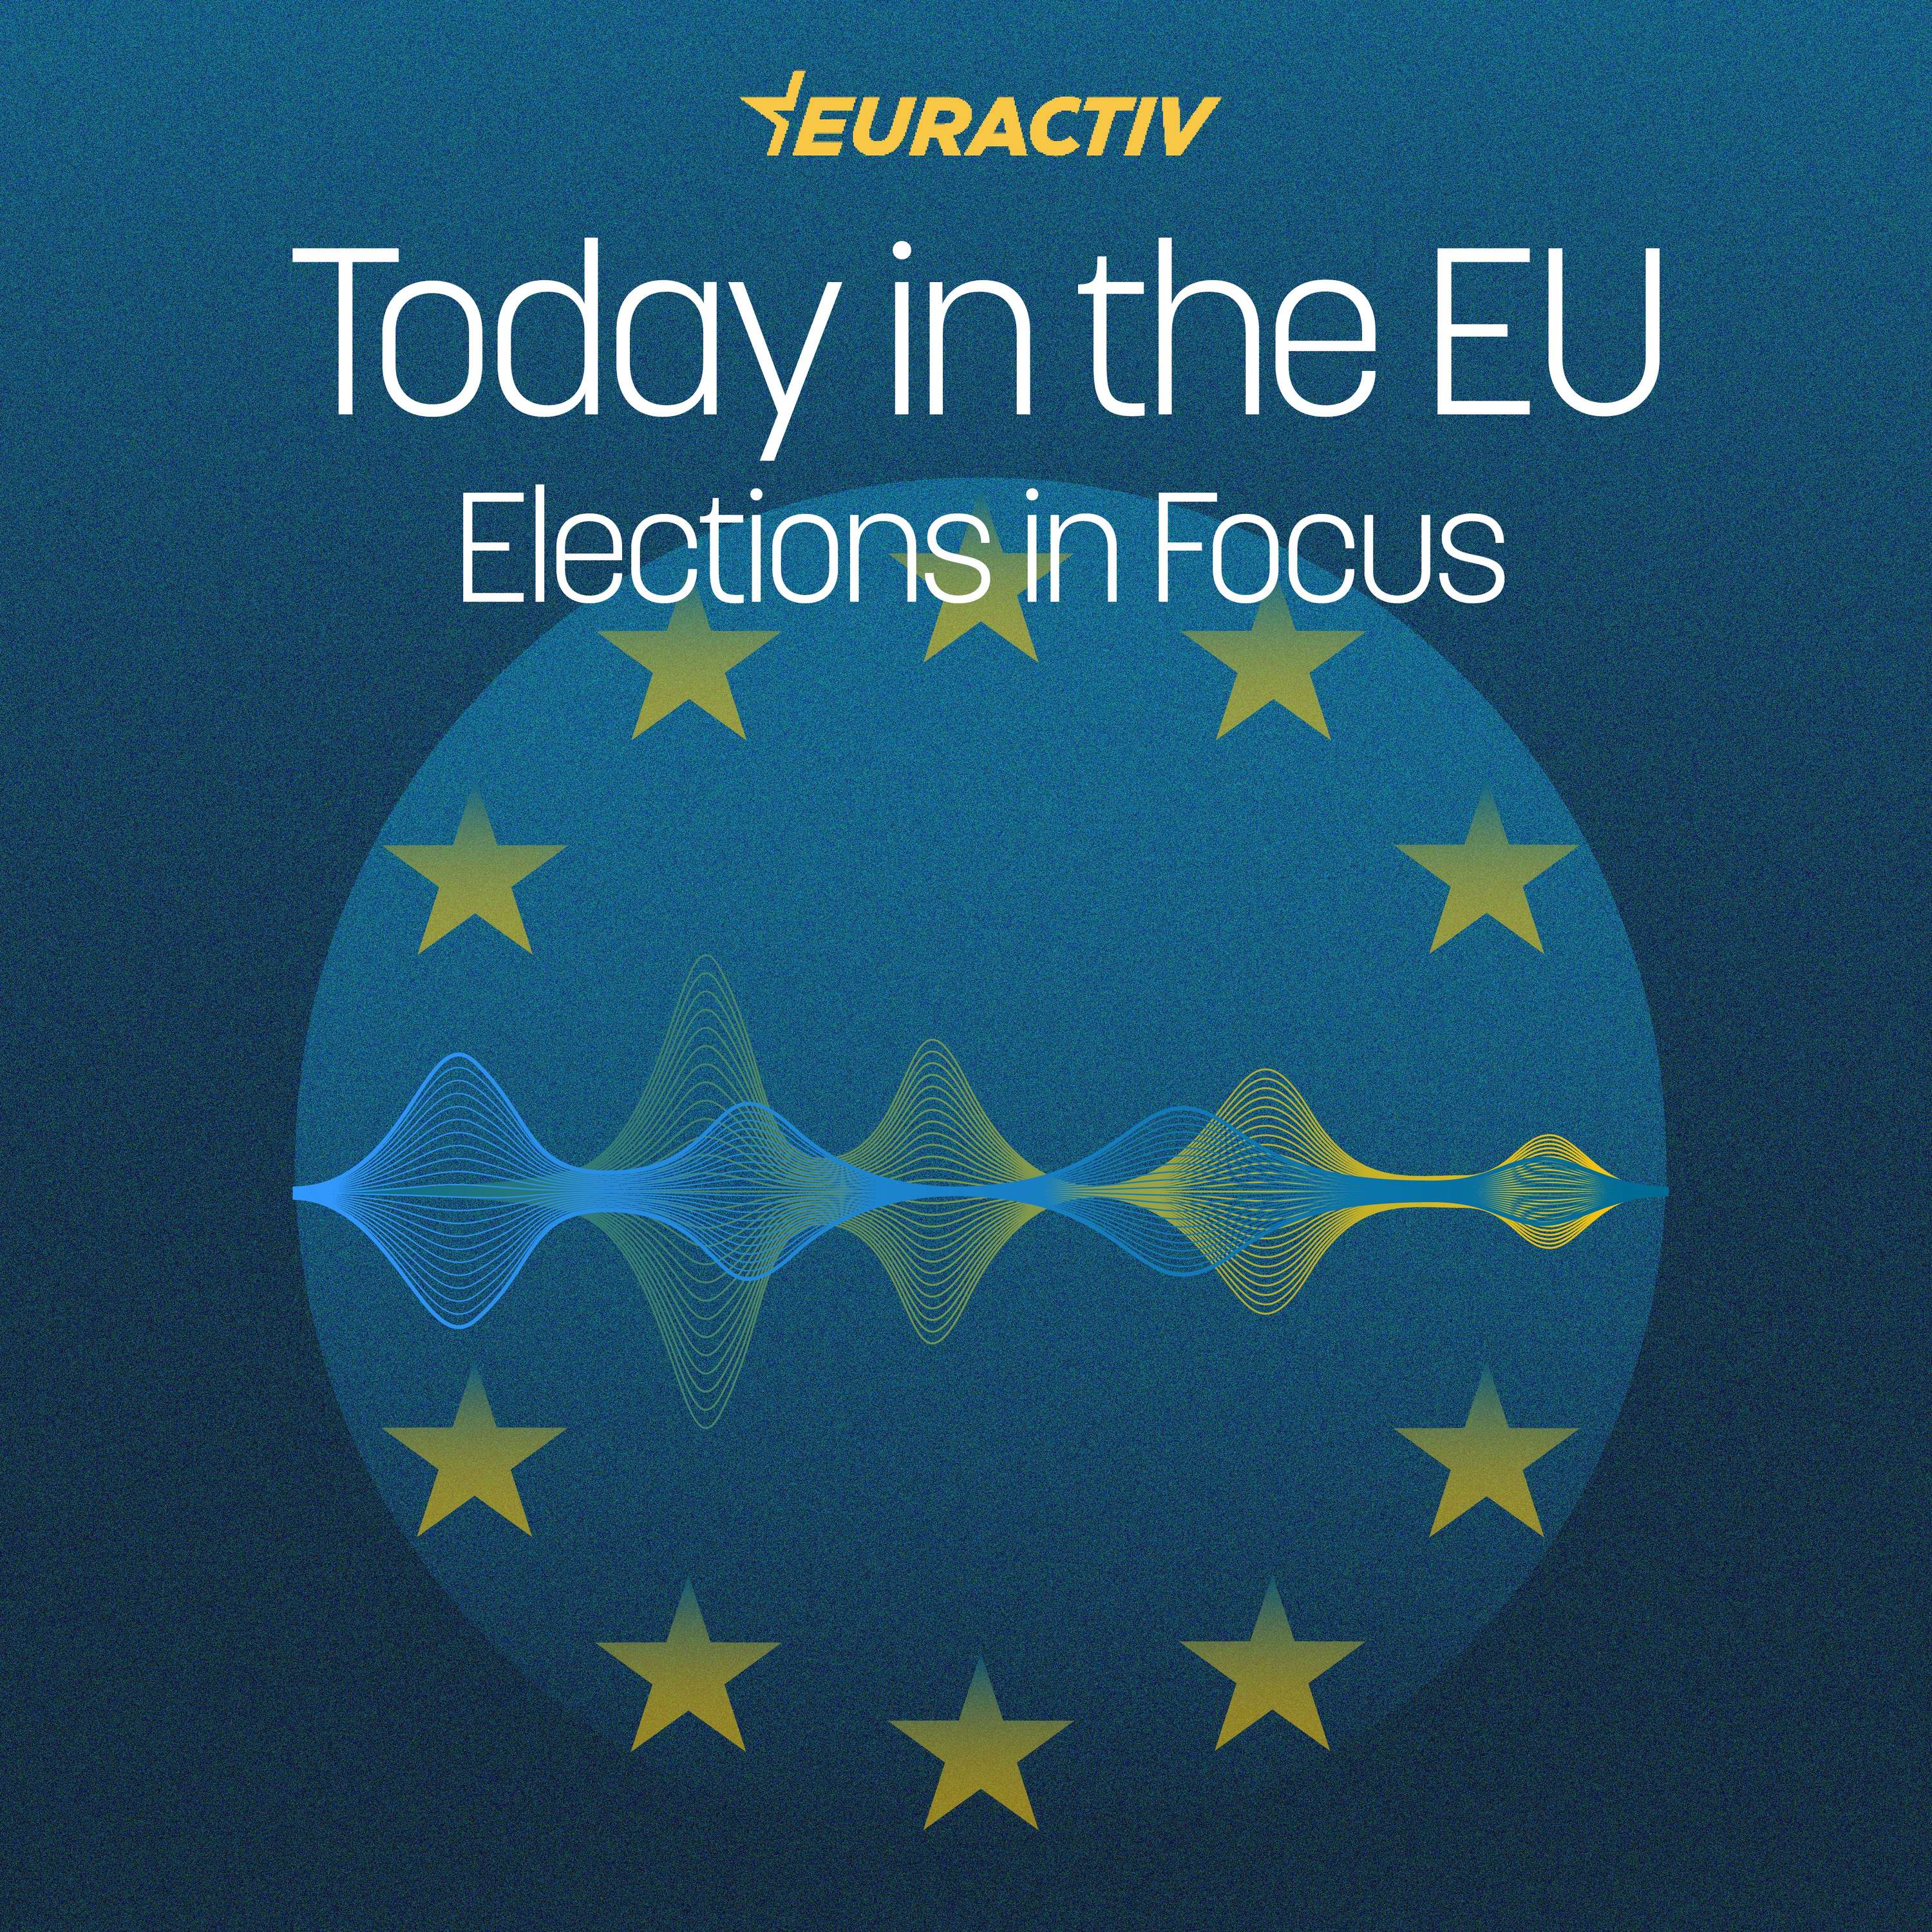 Elections in focus: The Vote